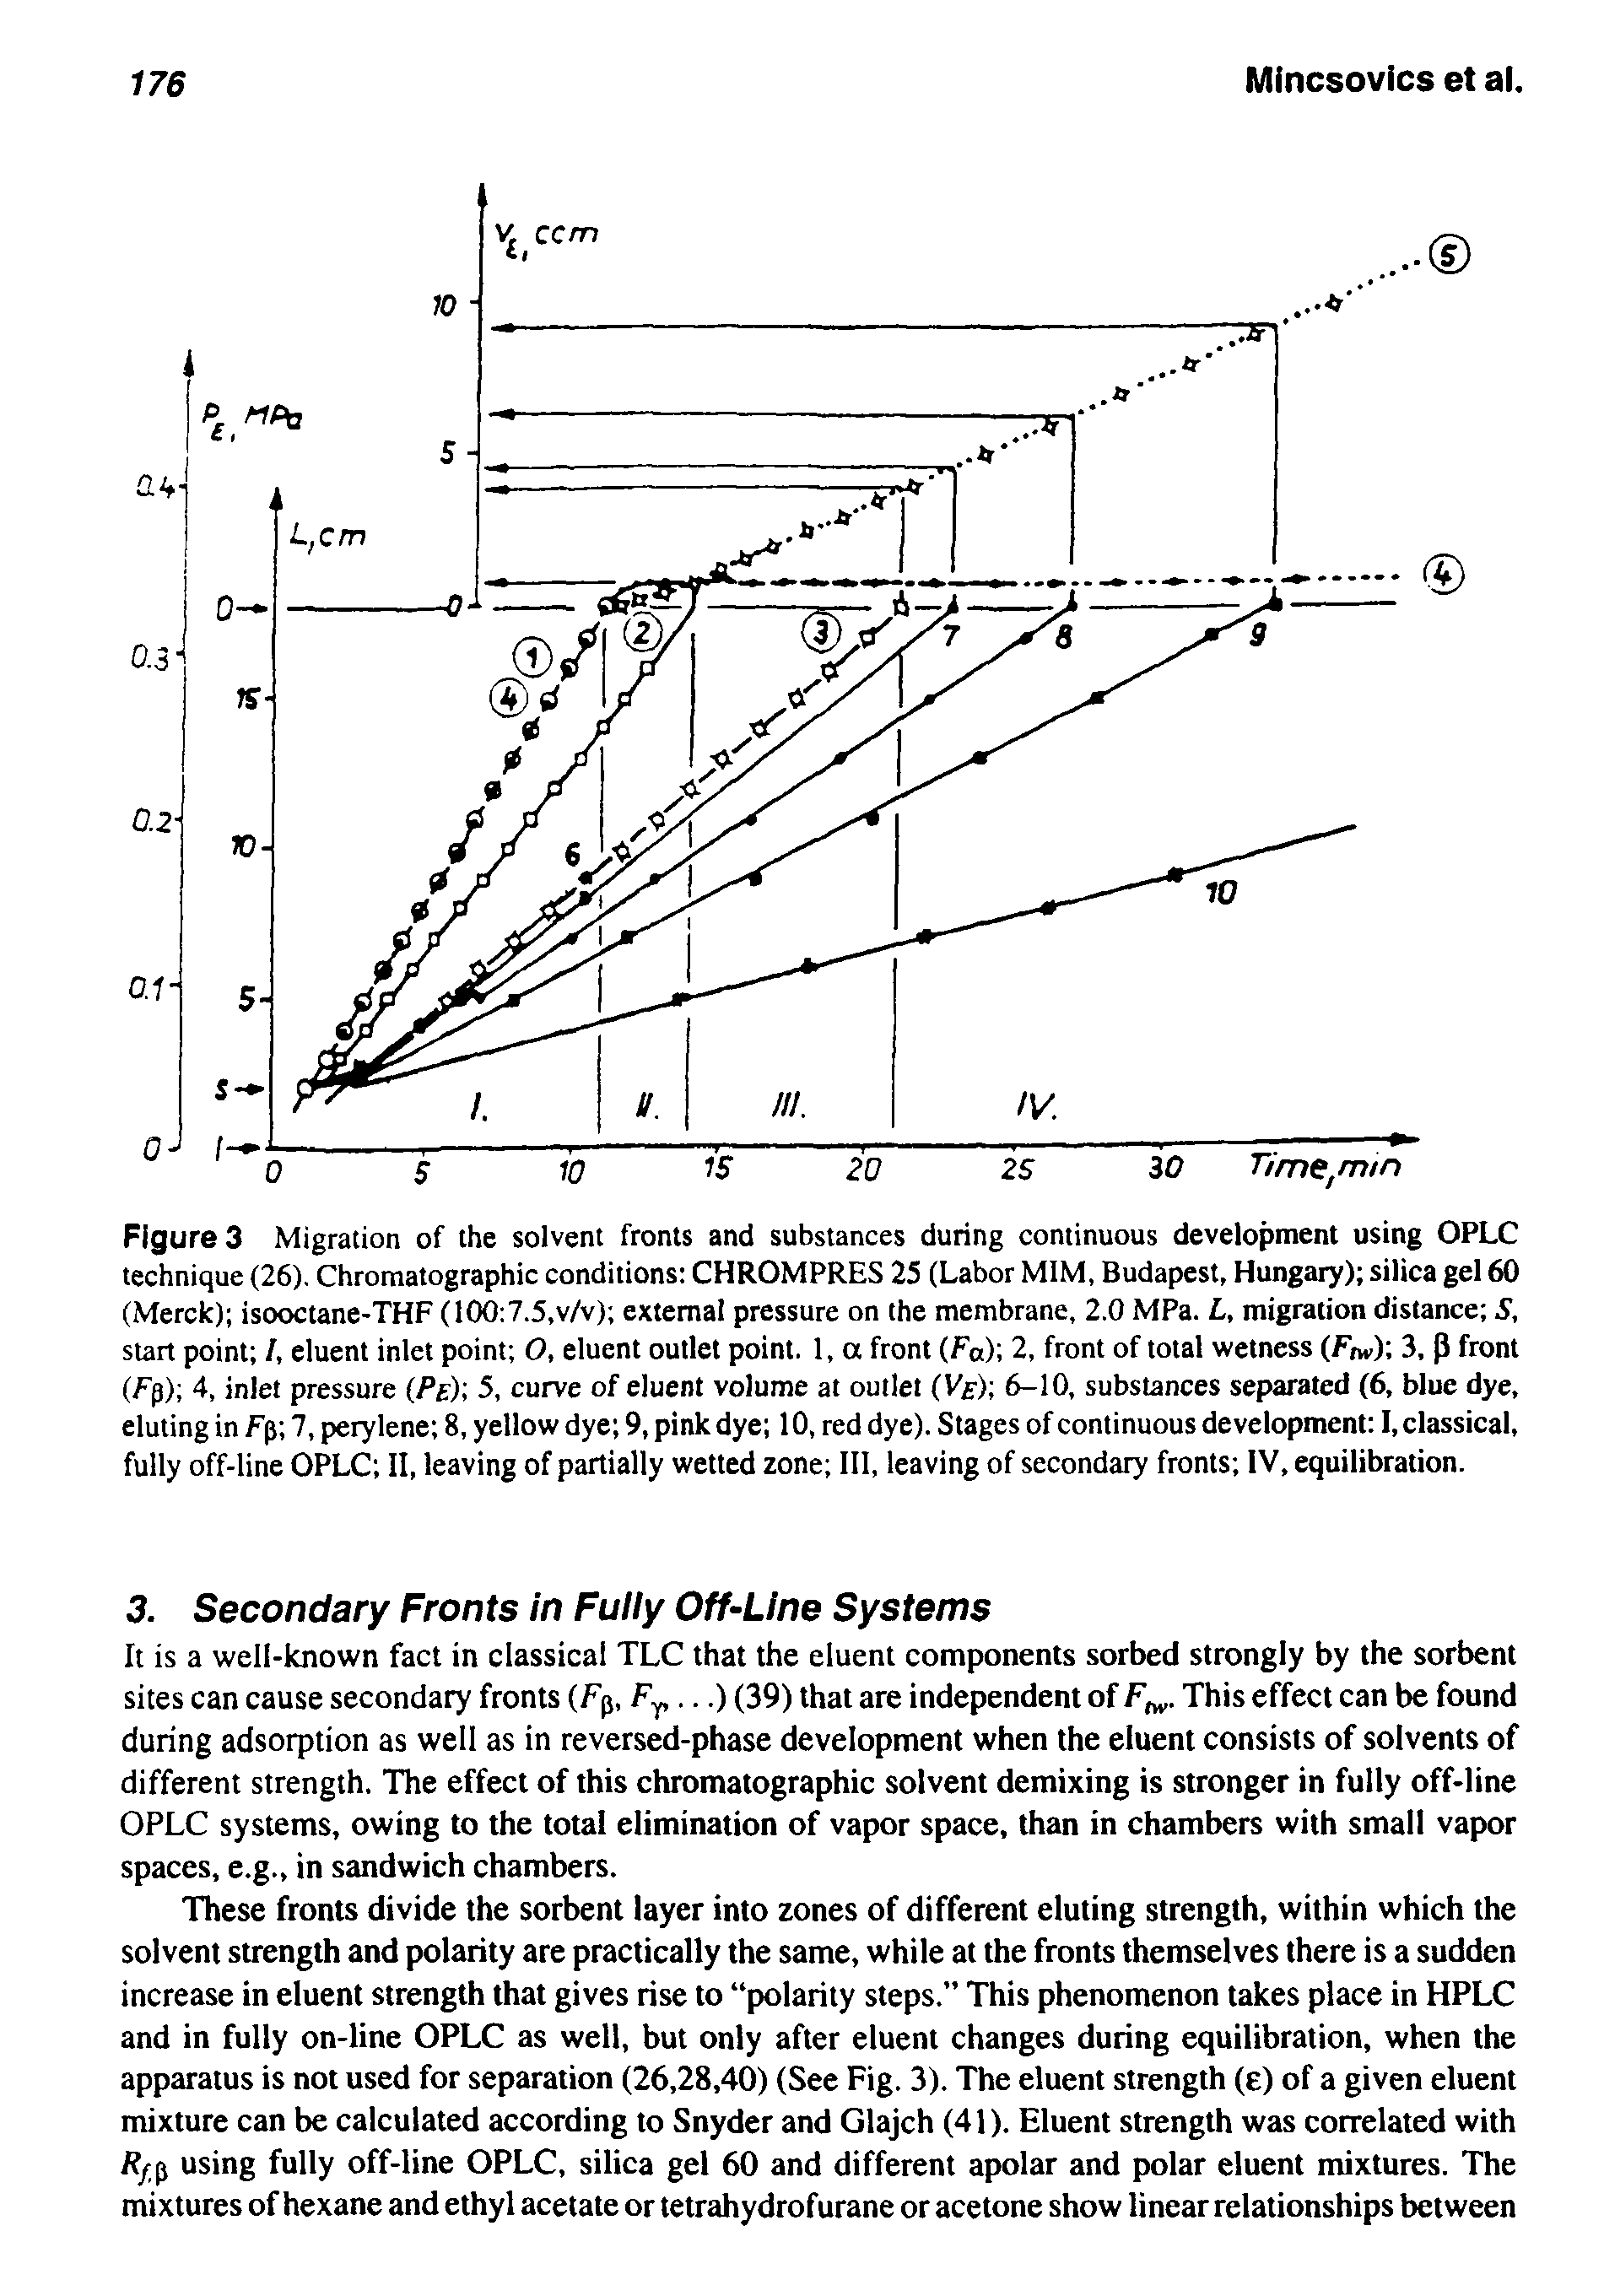 Figure 3 Migration of the solvent fronts and substances during continuous development using OPLC technique (26), Chromatographic conditions CHROMPRES 25 (Labor MIM, Budapest, Hungary) silica gel 60 (Merck) isooctane-THF (100 7.5,v/v) external pressure on the membrane, 2.0 MPa. L, migration distance S, start point I, eluent inlet point 0, eluent outlet point. 1, a front (Fa) 2, front of total wetness (Fm>) 3, P front (Fp) 4, inlet pressure (Pe) 5, curve of eluent volume at outlet (Vf) 6-10, substances separated (6, blue dye, eluting in Fp 7, perylene 8, yellow dye 9, pink dye 10, red dye). Stages of continuous development 1, classical, fully off-line OPLC II, leaving of partially wetted zone III, leaving of secondary fronts IV, equilibration.